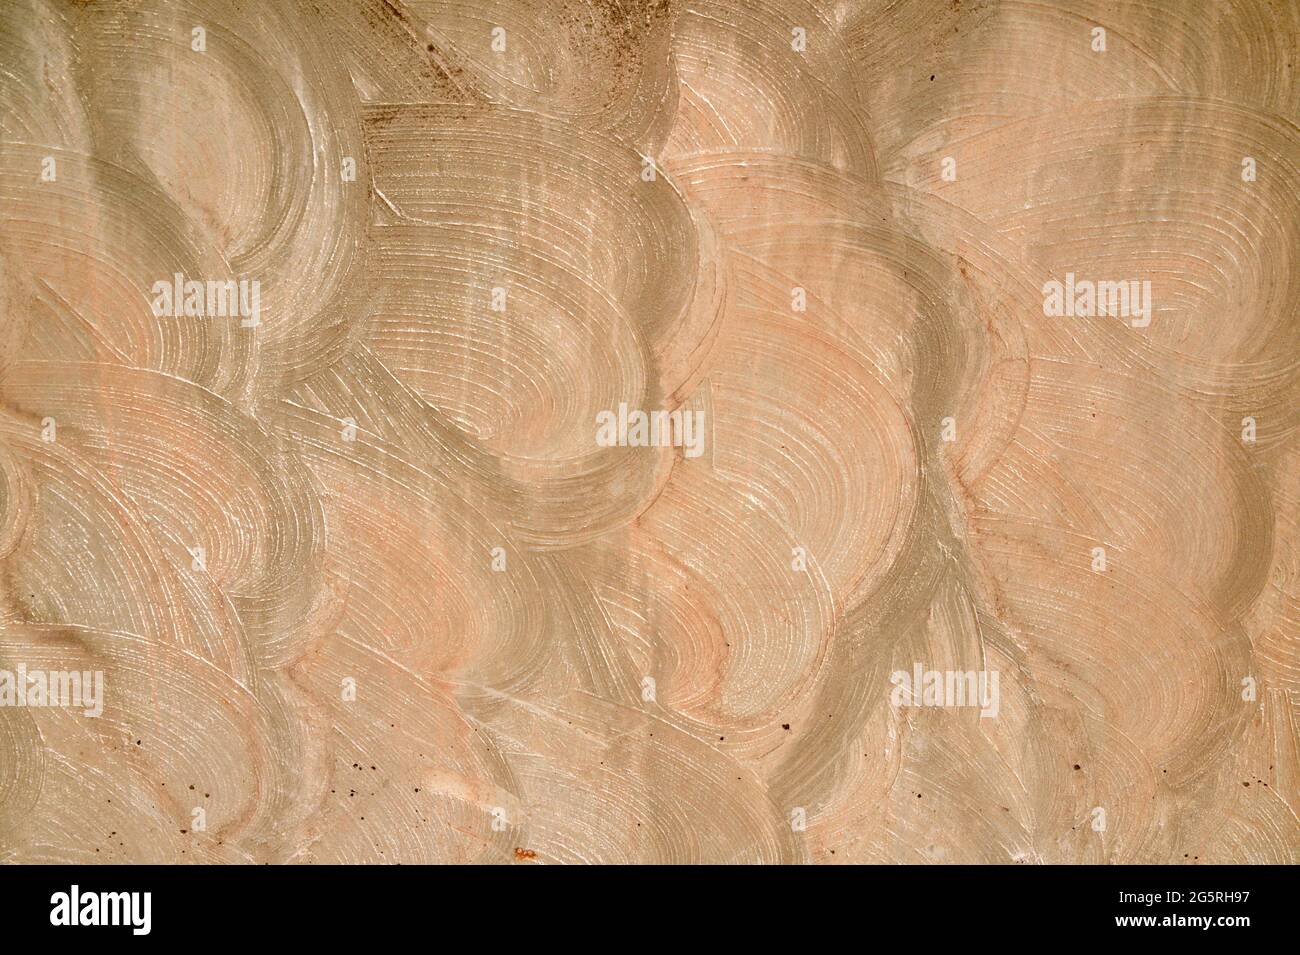 Abstract, multi-colored swirled stucco, or plaster, wall background. Stock Photo